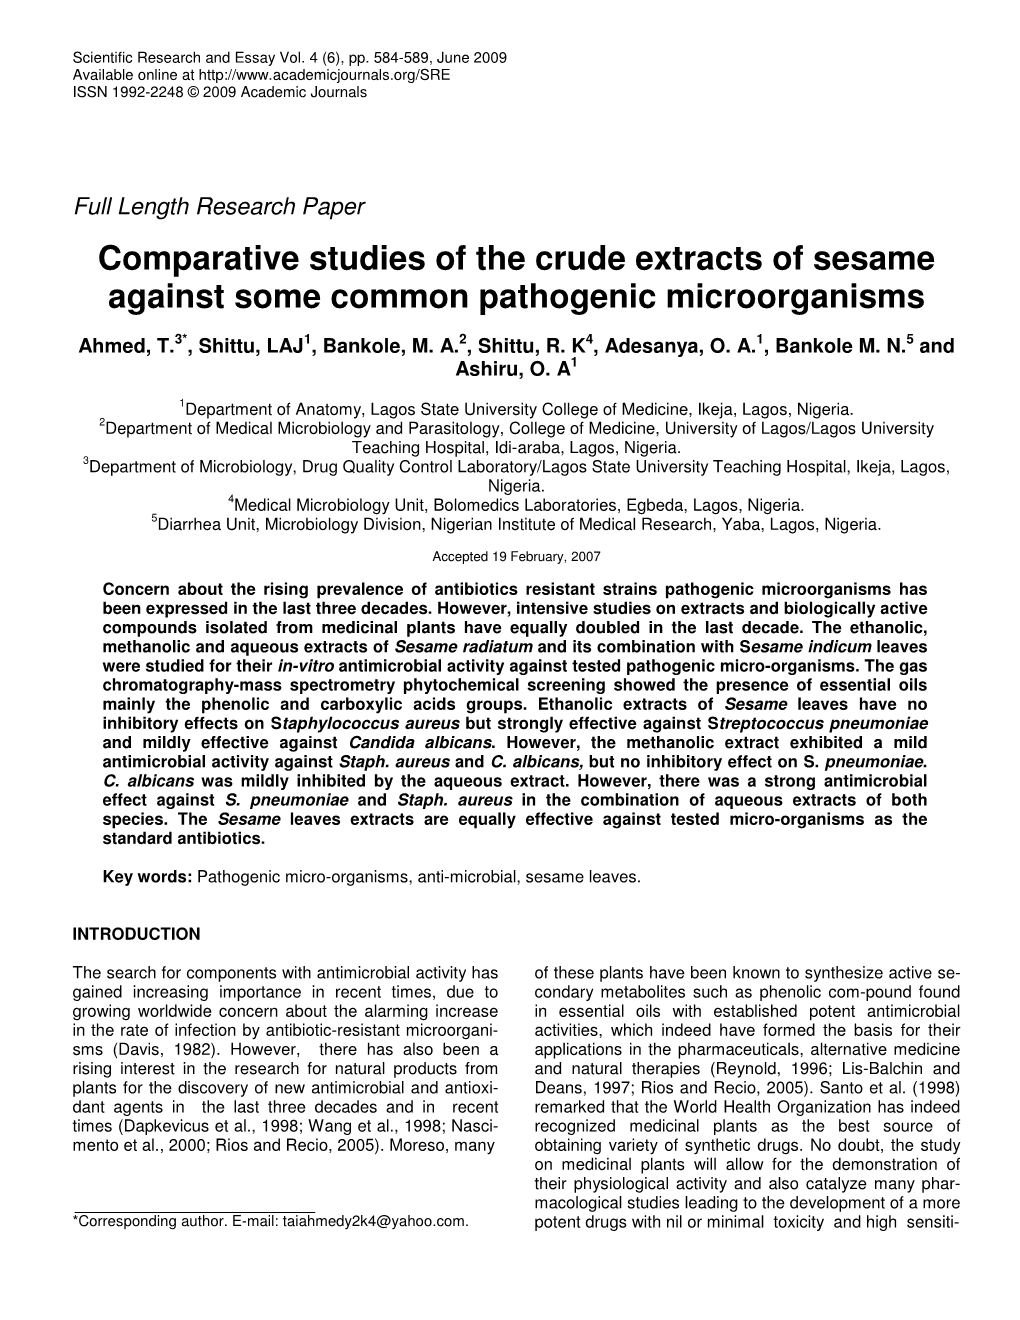 Comparative Studies of the Crude Extracts of Sesame Against Some Common Pathogenic Microorganisms